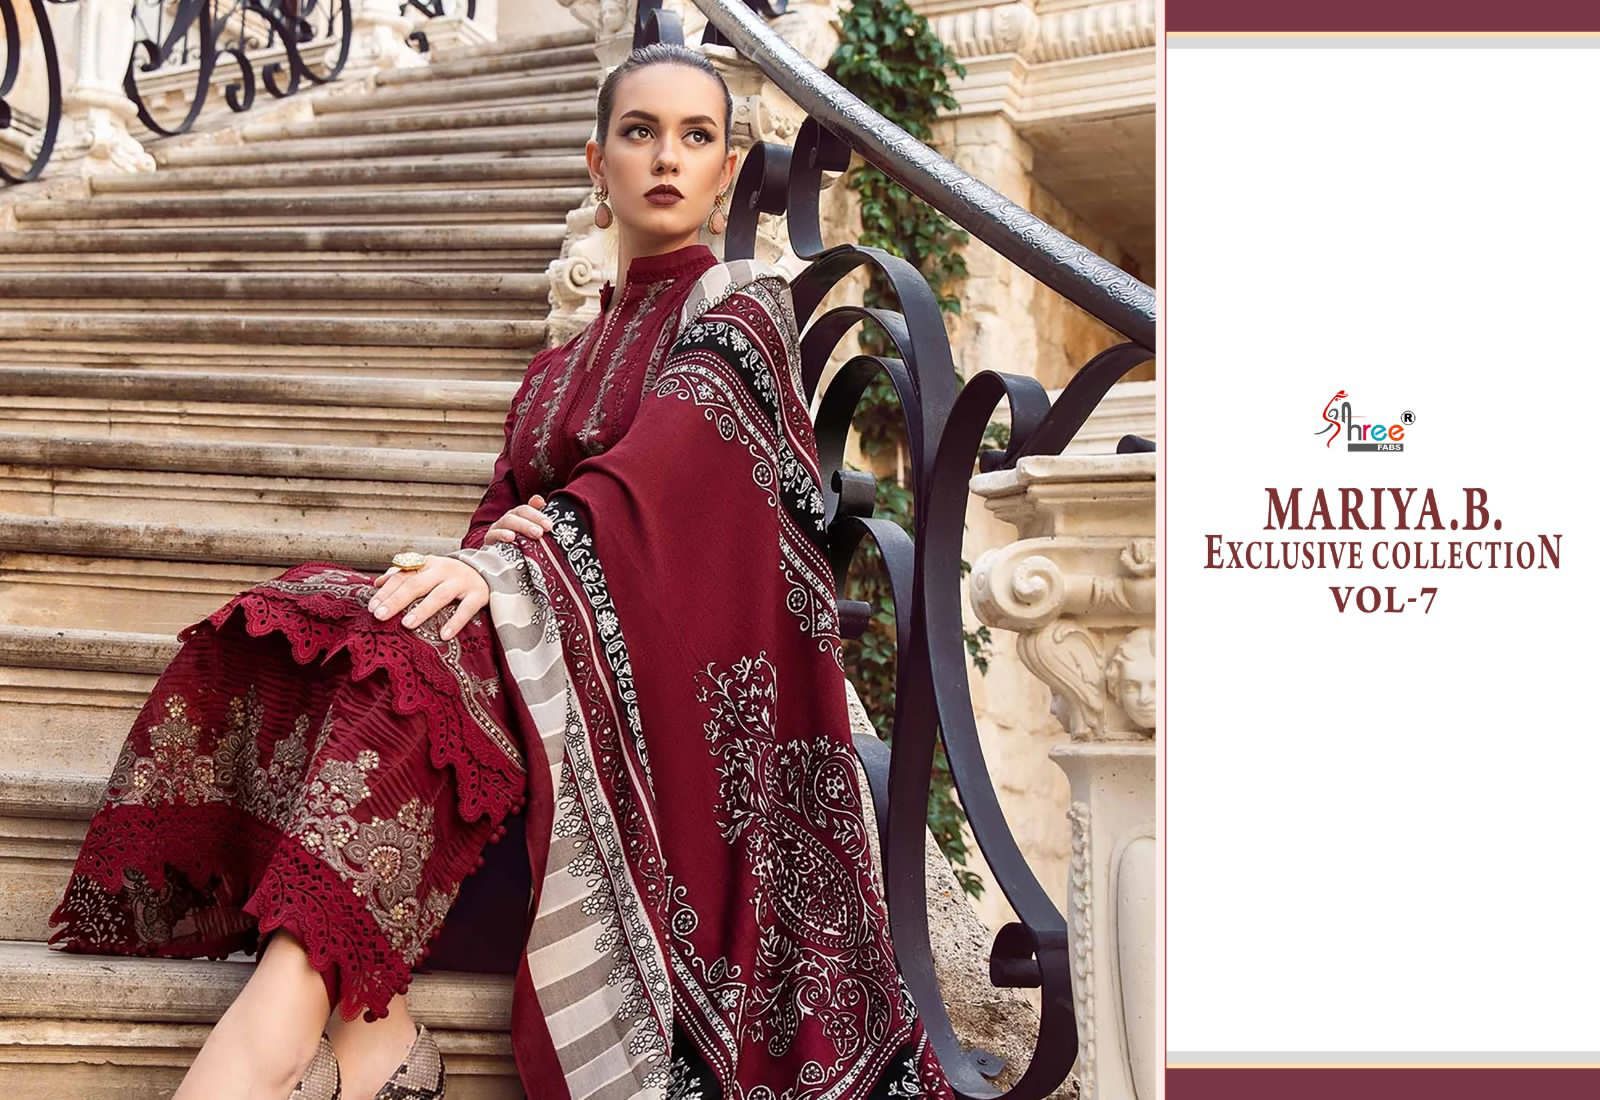 Shree Fabs Maria B Exclusive Collection Vol 7 rayon with embroidery work Chiffon Dupatta pakistani suits online india - jilaniwholesalesuit